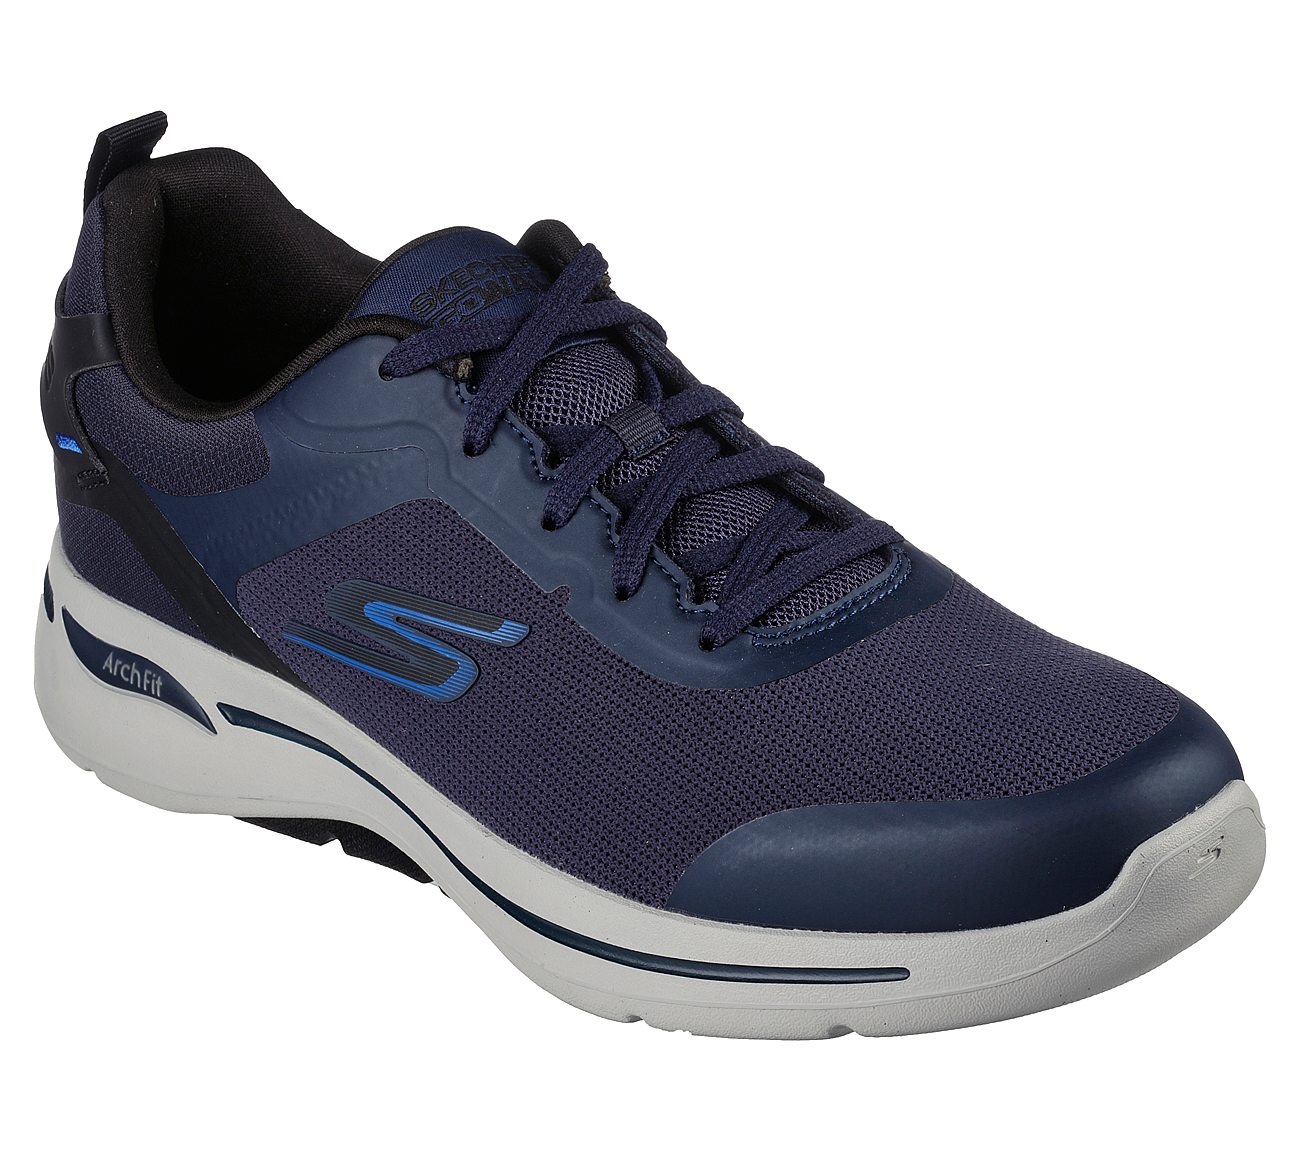 Skechers Navy Go Walk Arch Fit Terra Mens Lace Up Shoes - Style ID ...